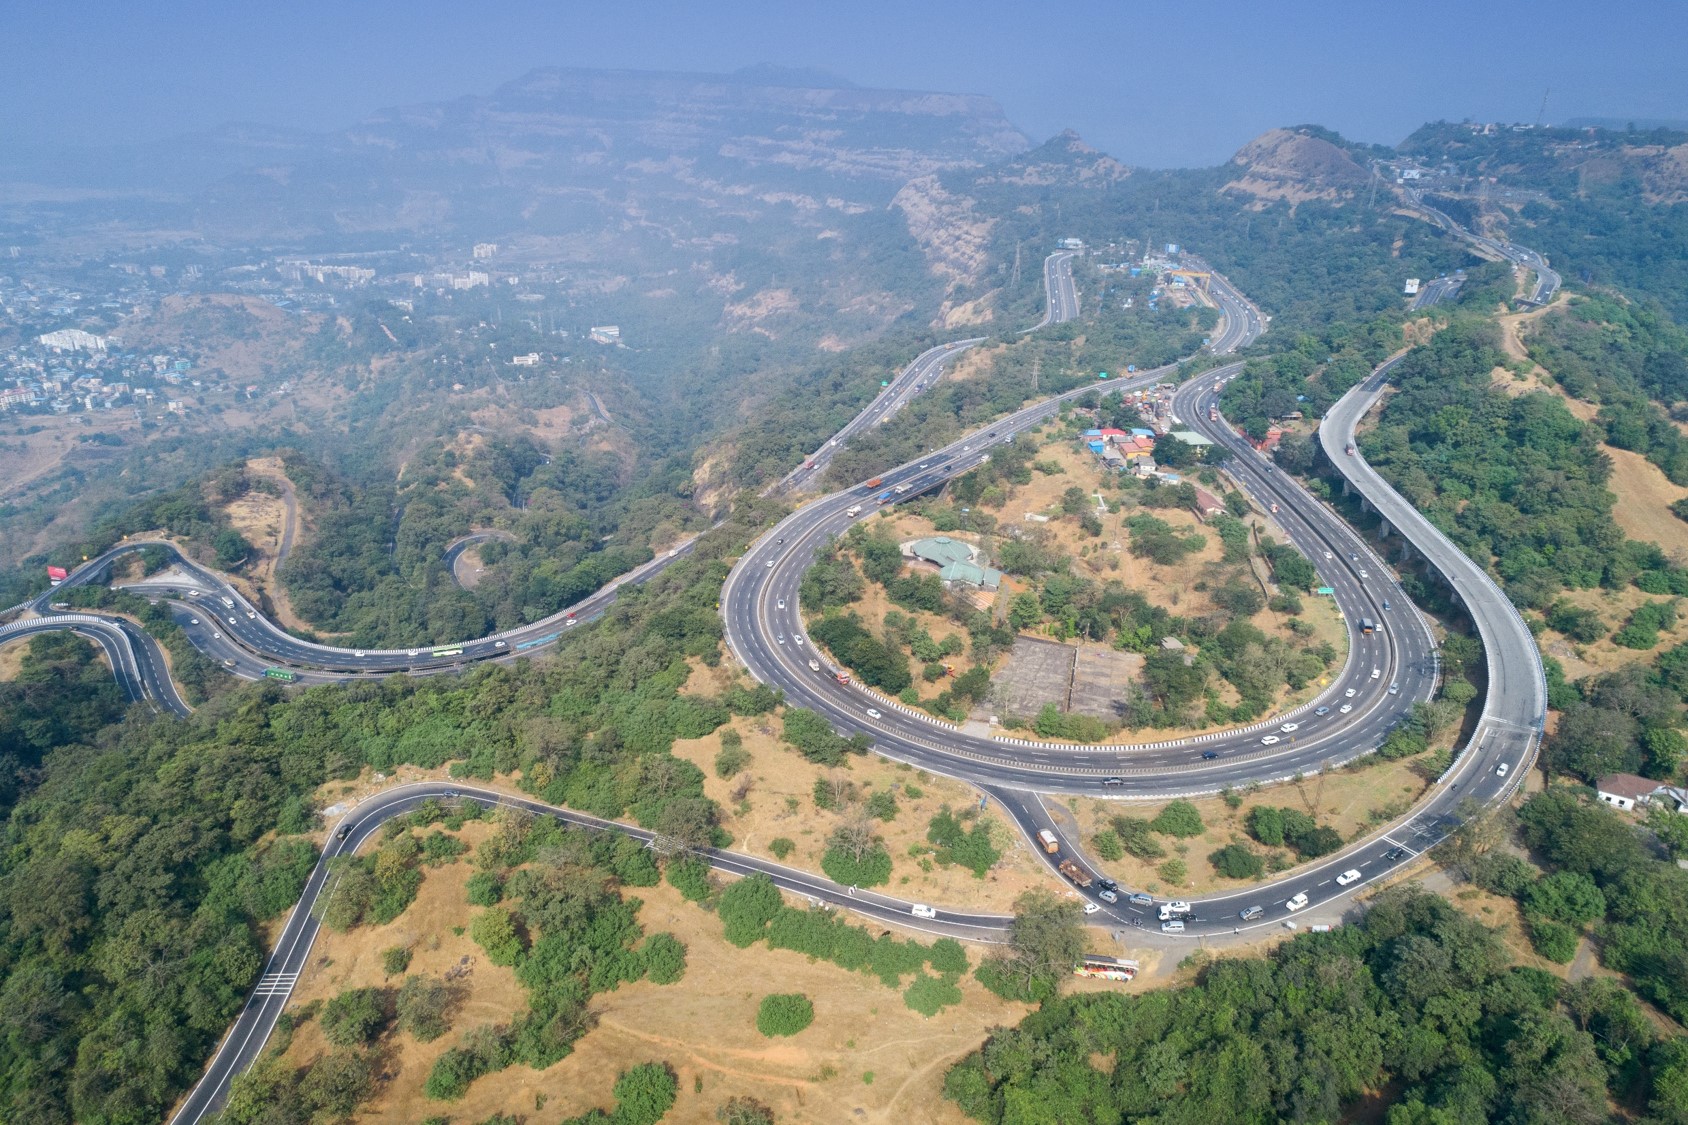 Mumbai-Pune Expressway Zero Fatality Corridor project delivers 52% reduction in deaths since 2016